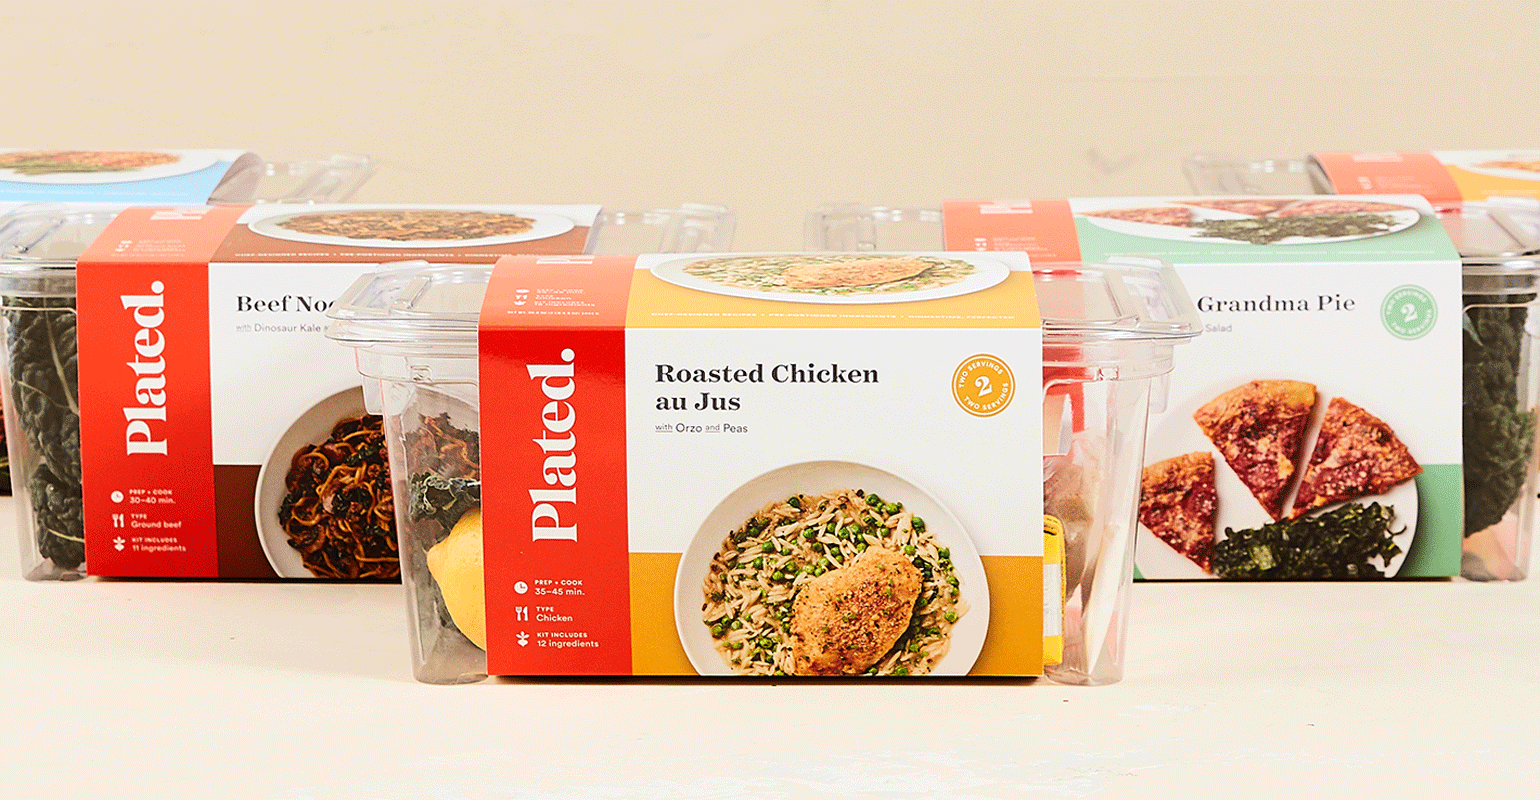 Expanding Deli Menu With Meal Kits - Deli Business